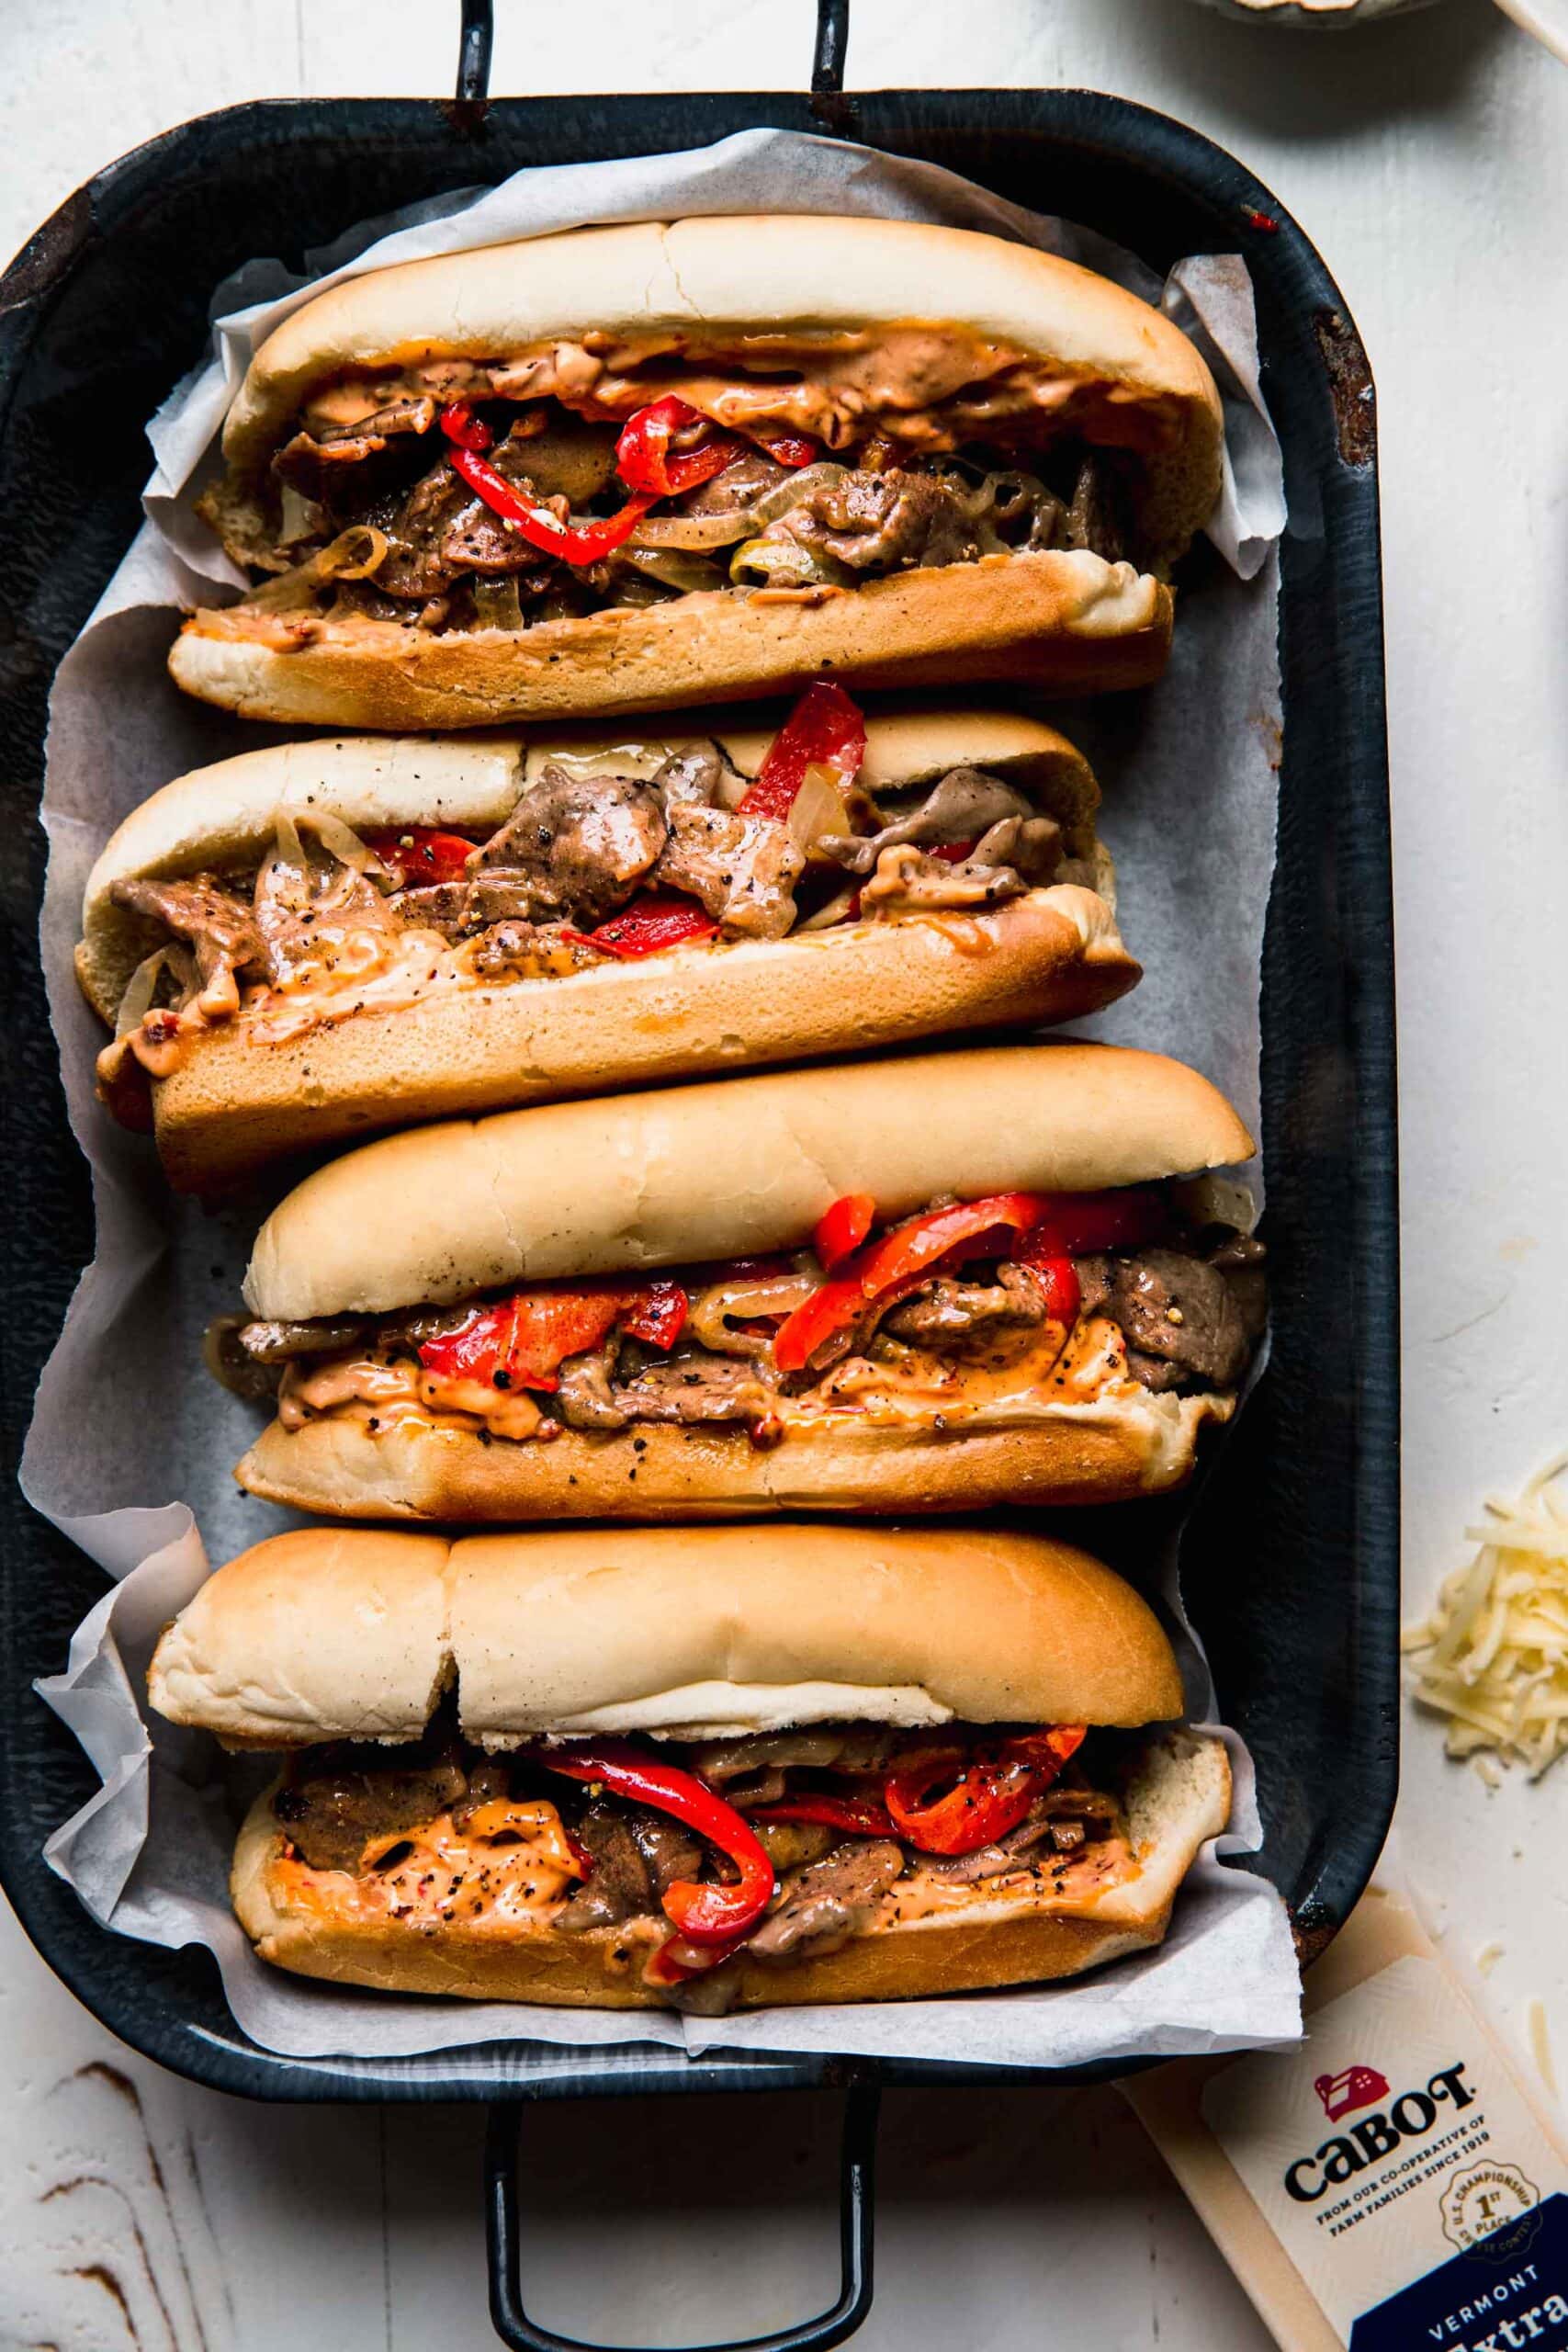 Philly Cheesesteak Sandwiches with Chipotle Mayo - Platings + Pairings